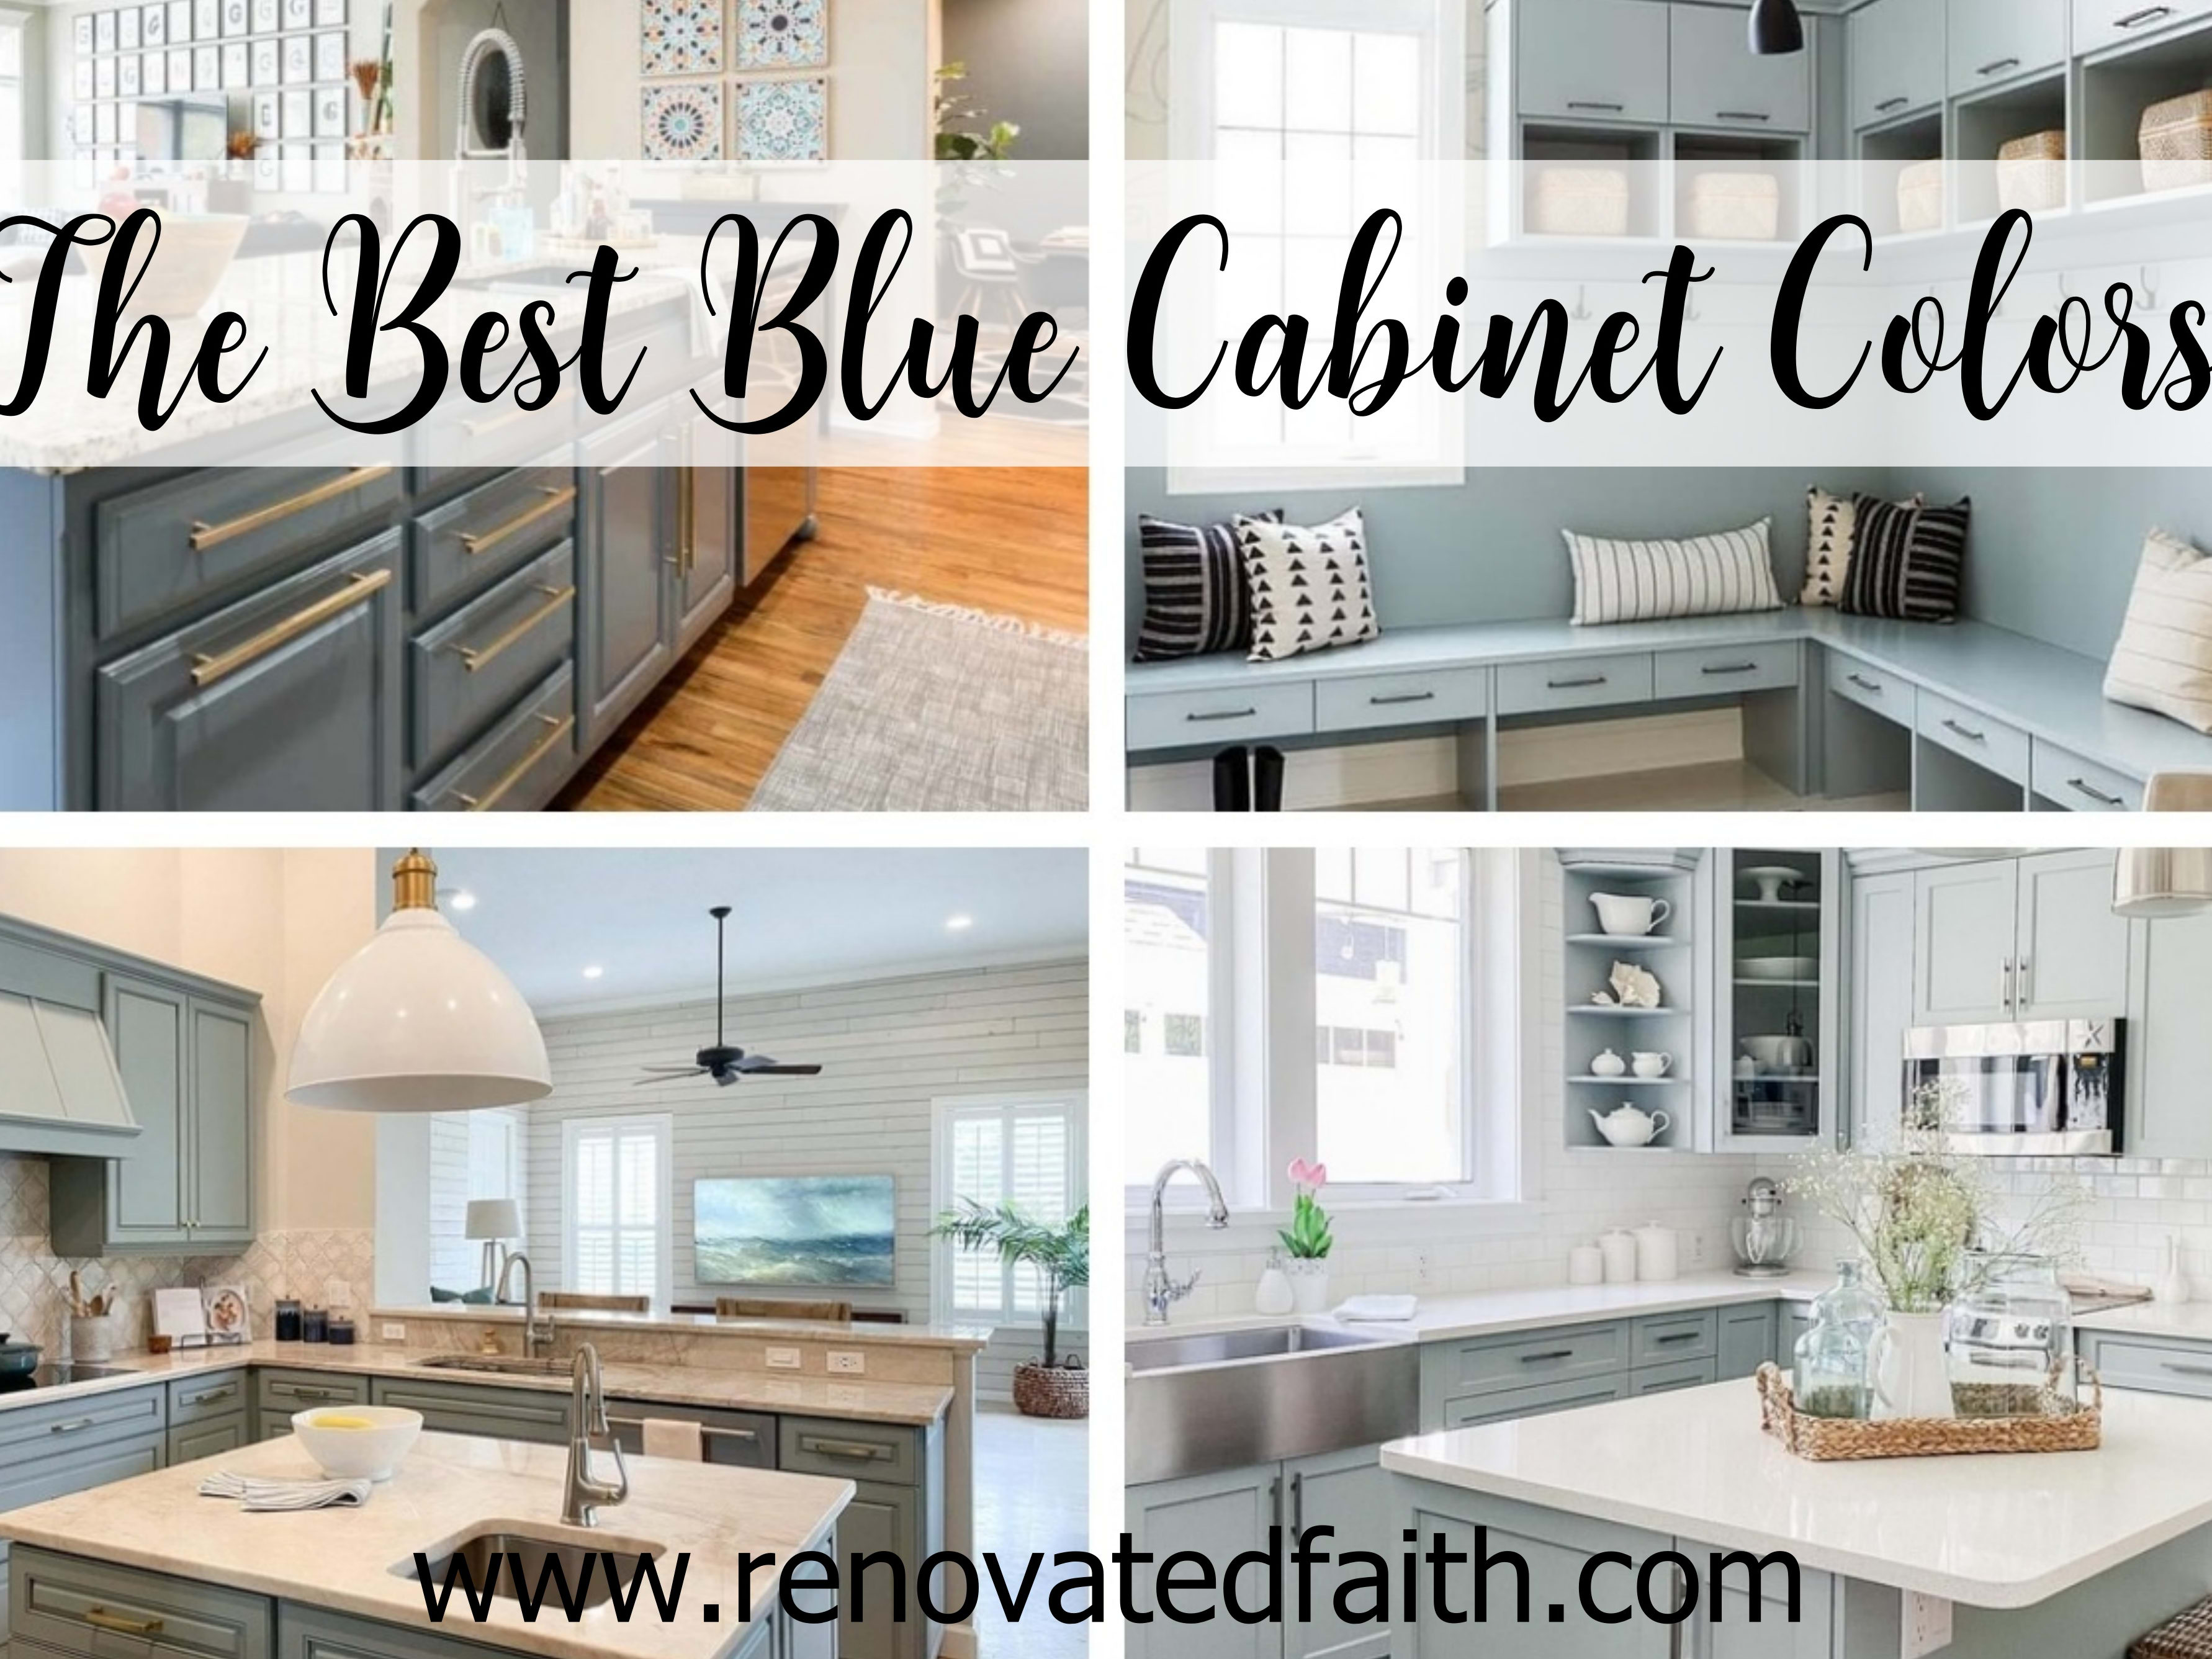 Warm Blue Kitchen Cabinets: Adding a Cozy and Cool Touch to Your Home ...